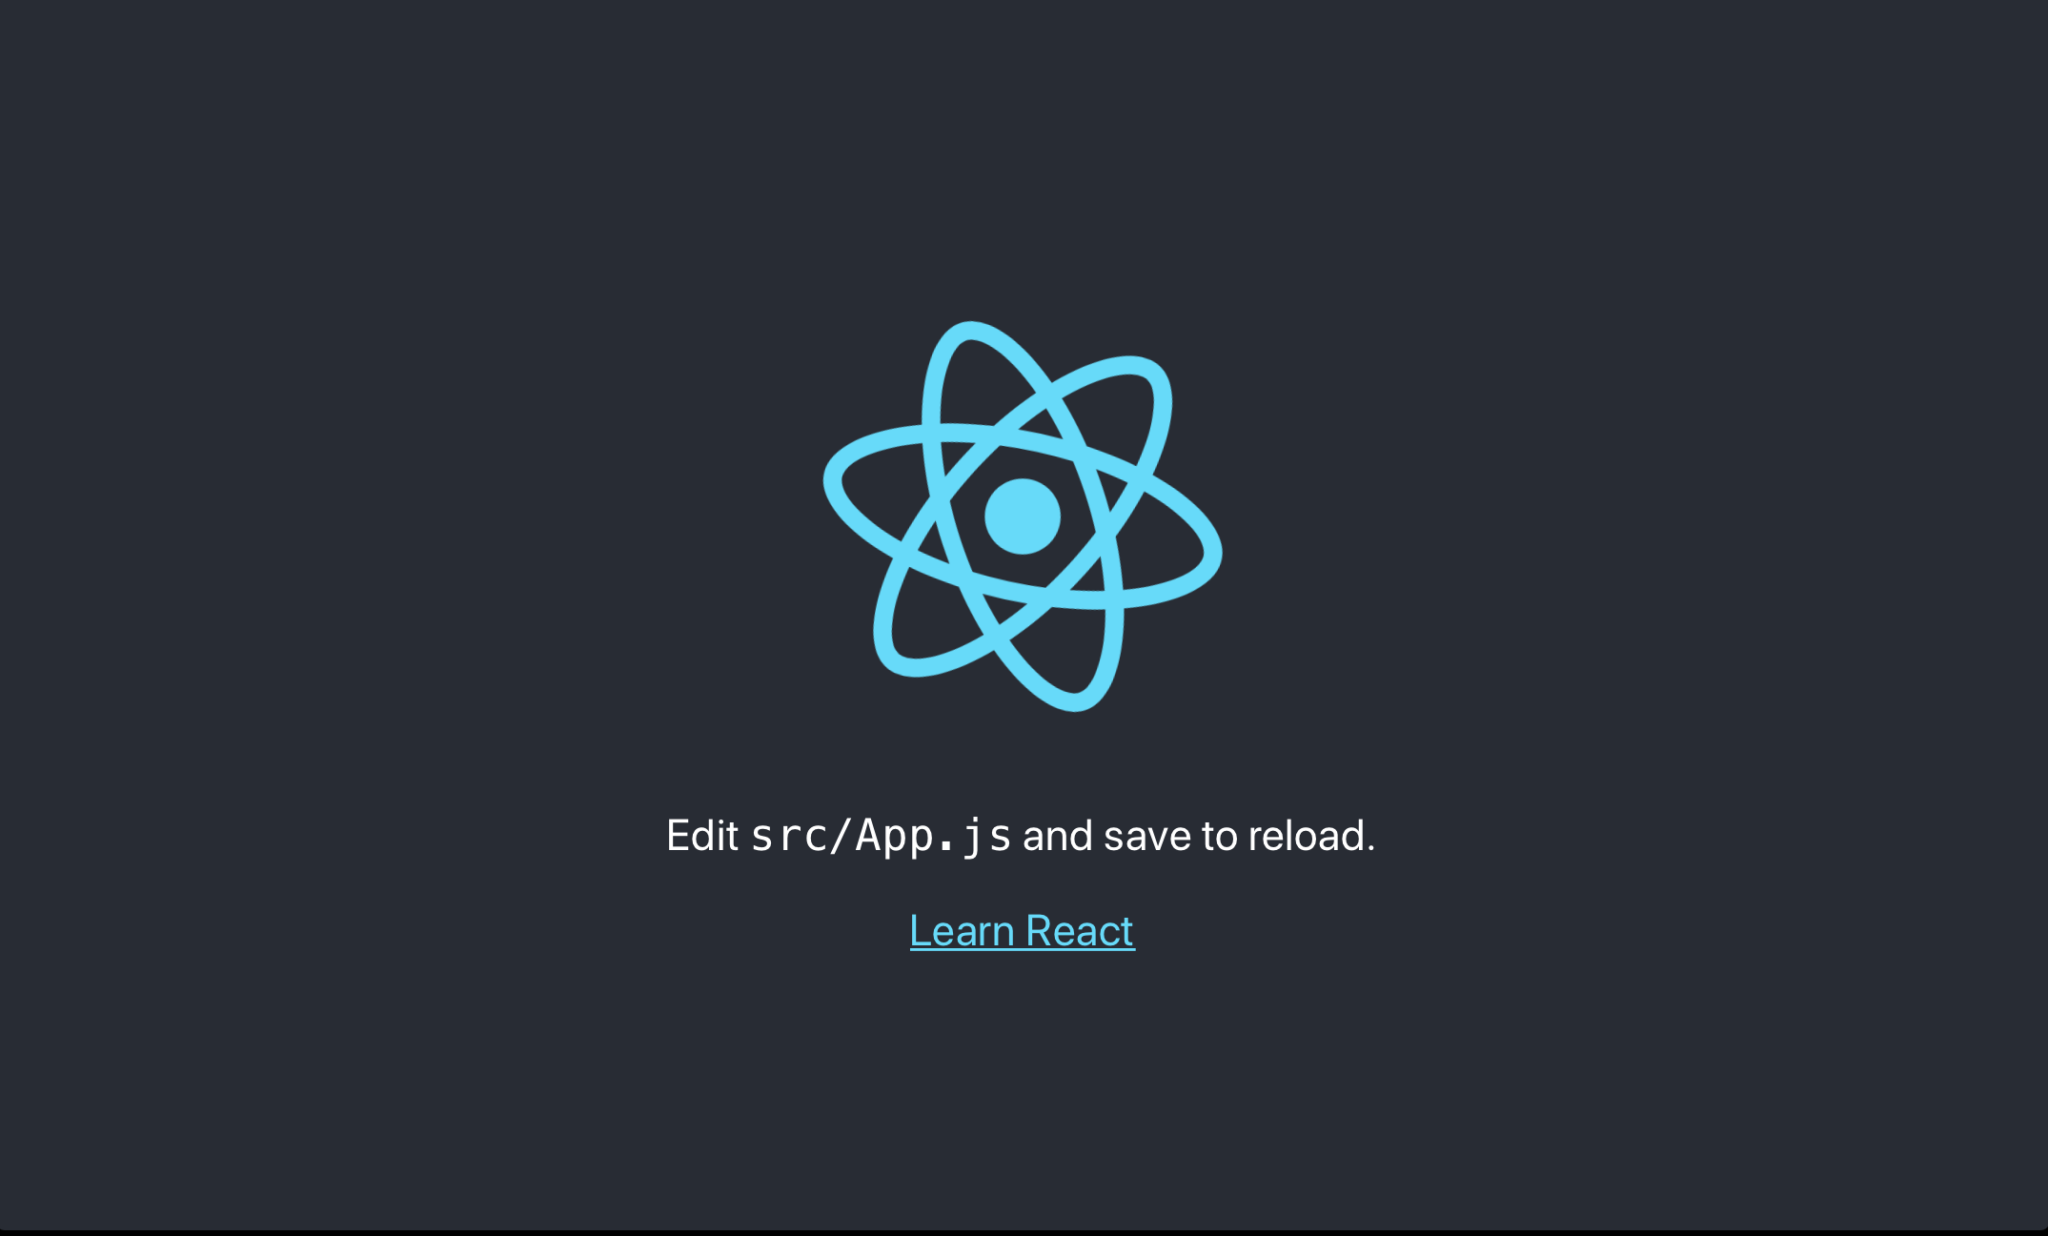 edit src/App.js and save to reload React app